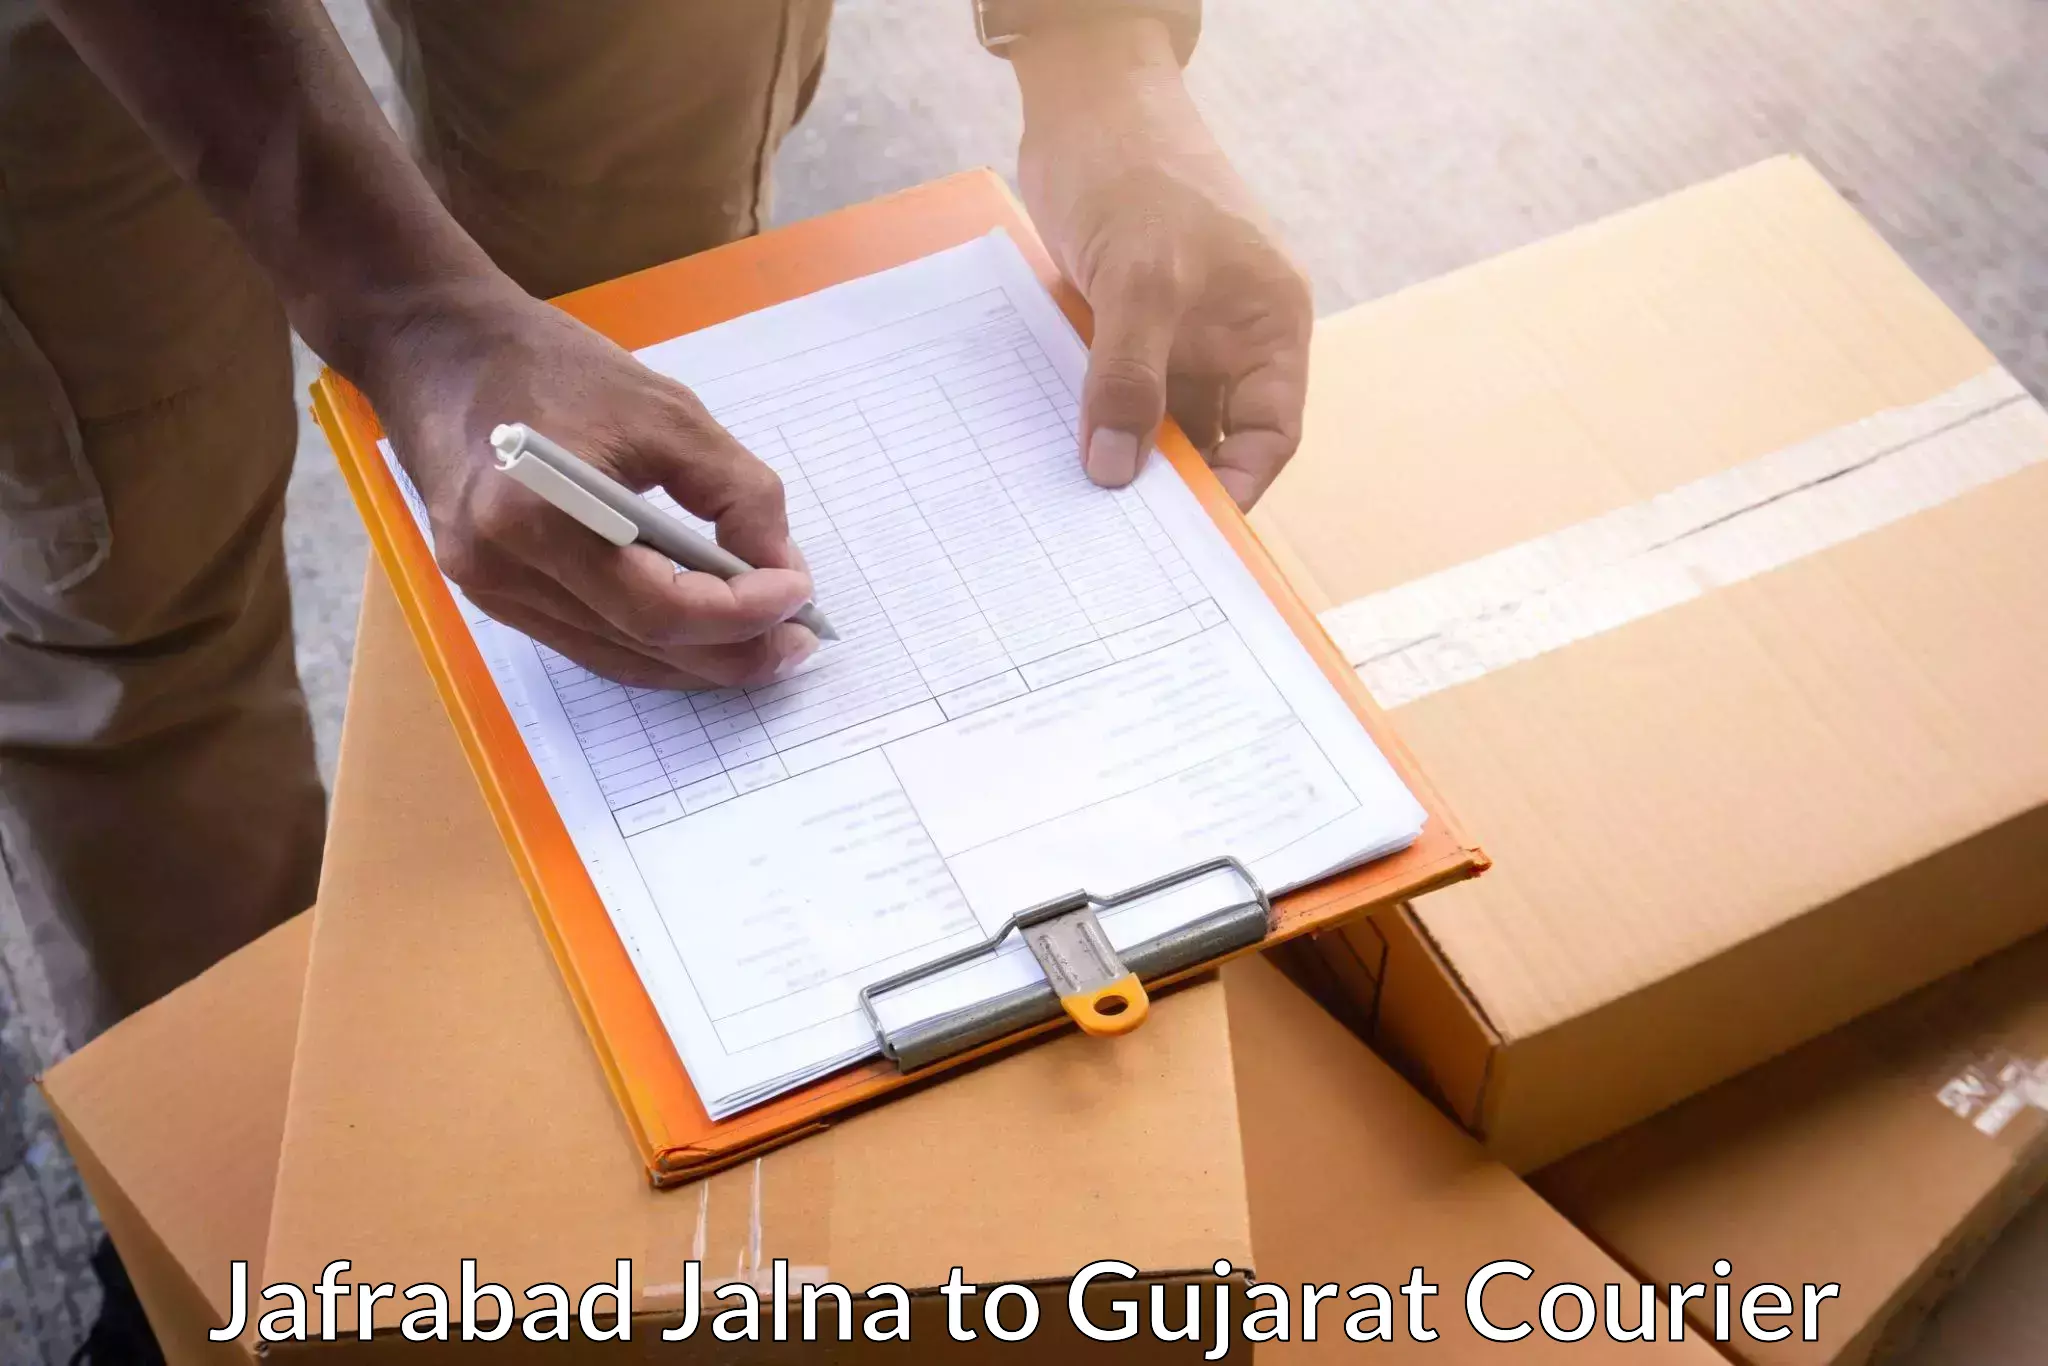 Fast delivery service in Jafrabad Jalna to Gujarat